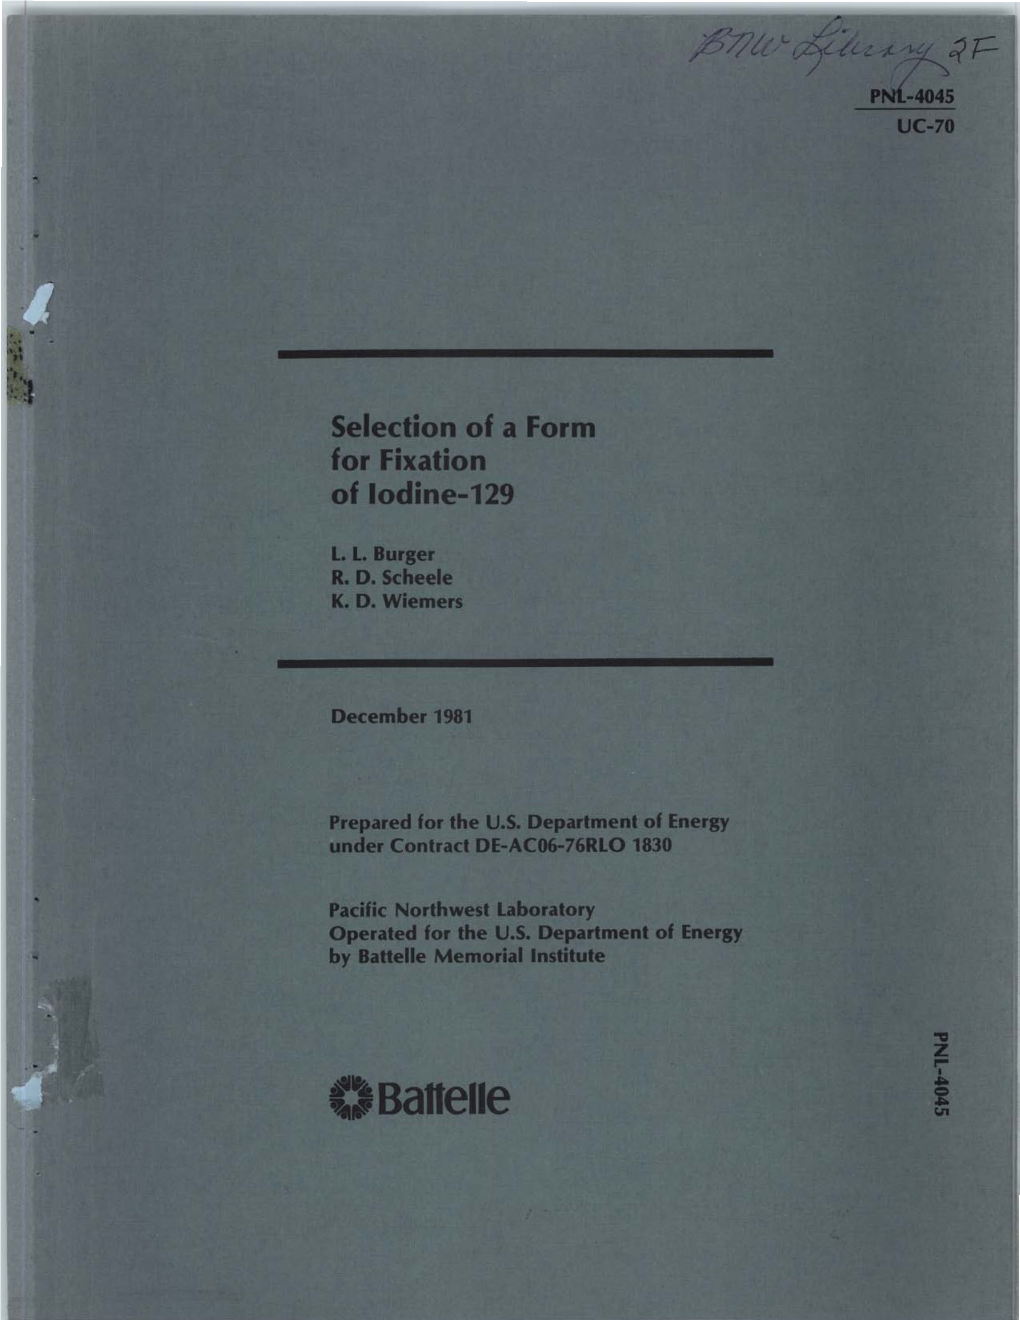 Selection of a Form for Fixation of Iodine-I29